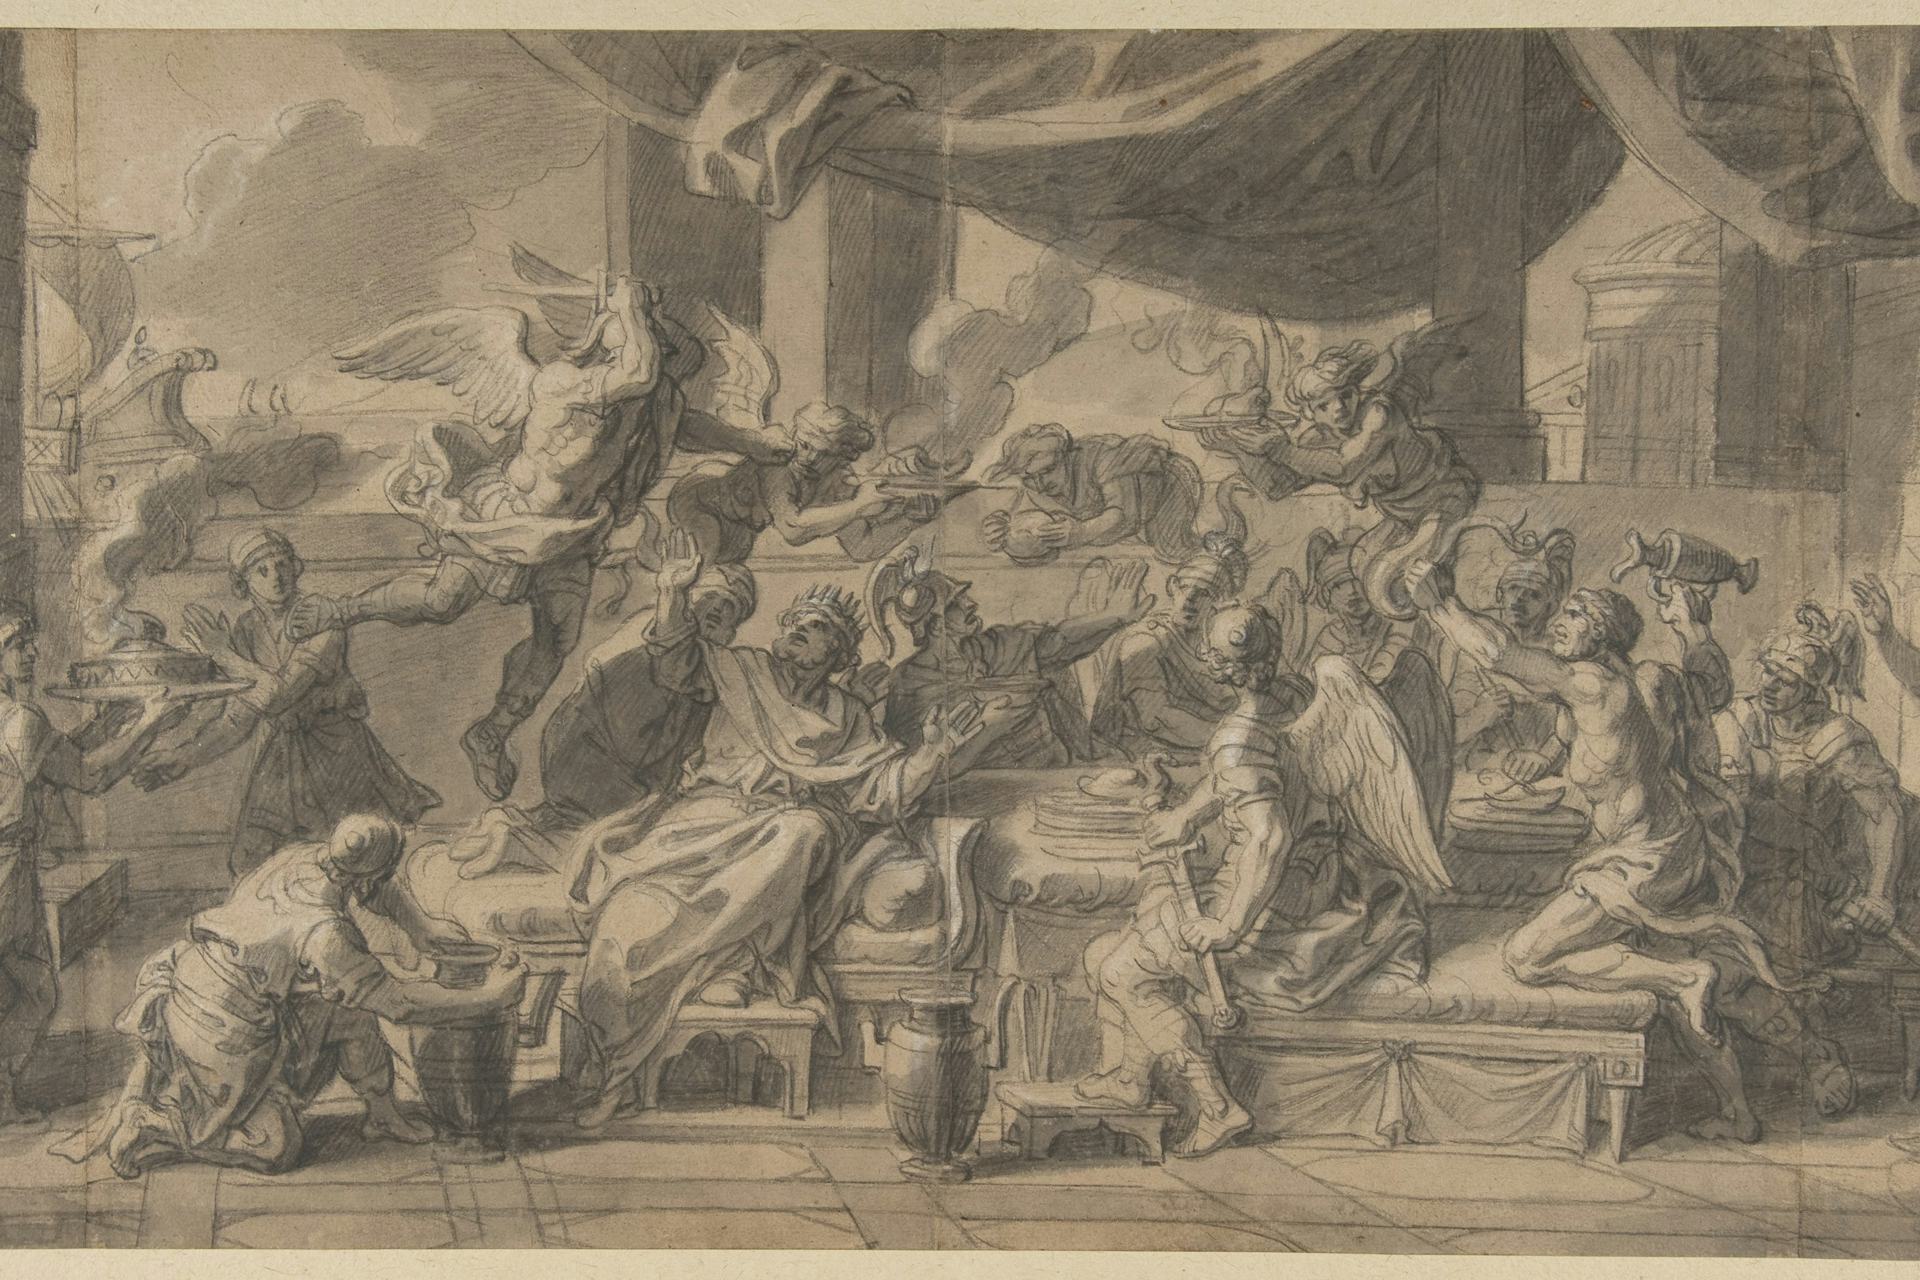 The Harpies Driven from the Table of King Phineus by Zetes and Calais by François Verdier